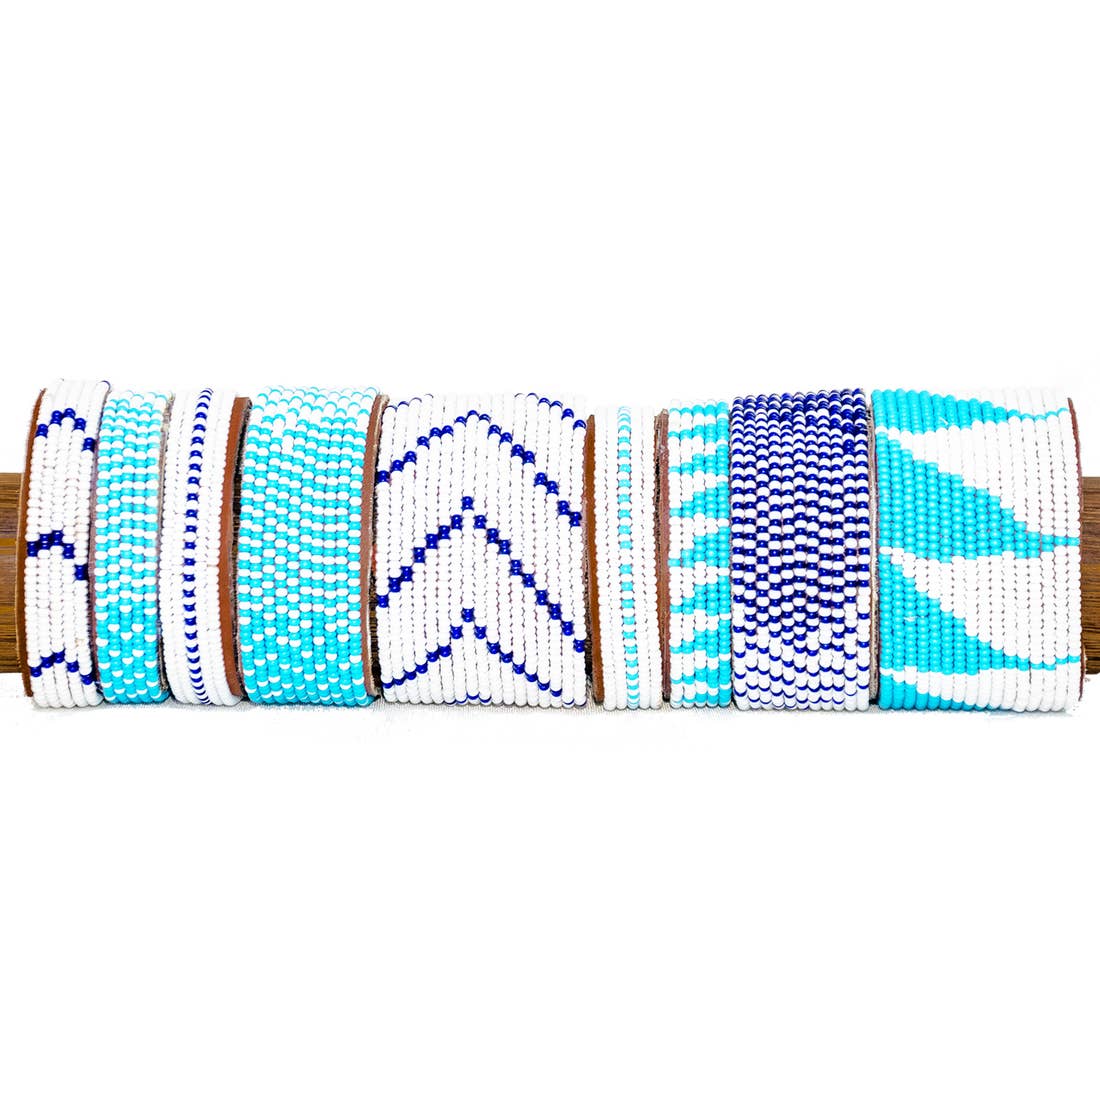 Blue Swahili Bracelet Jewelry available at Southern Sunday